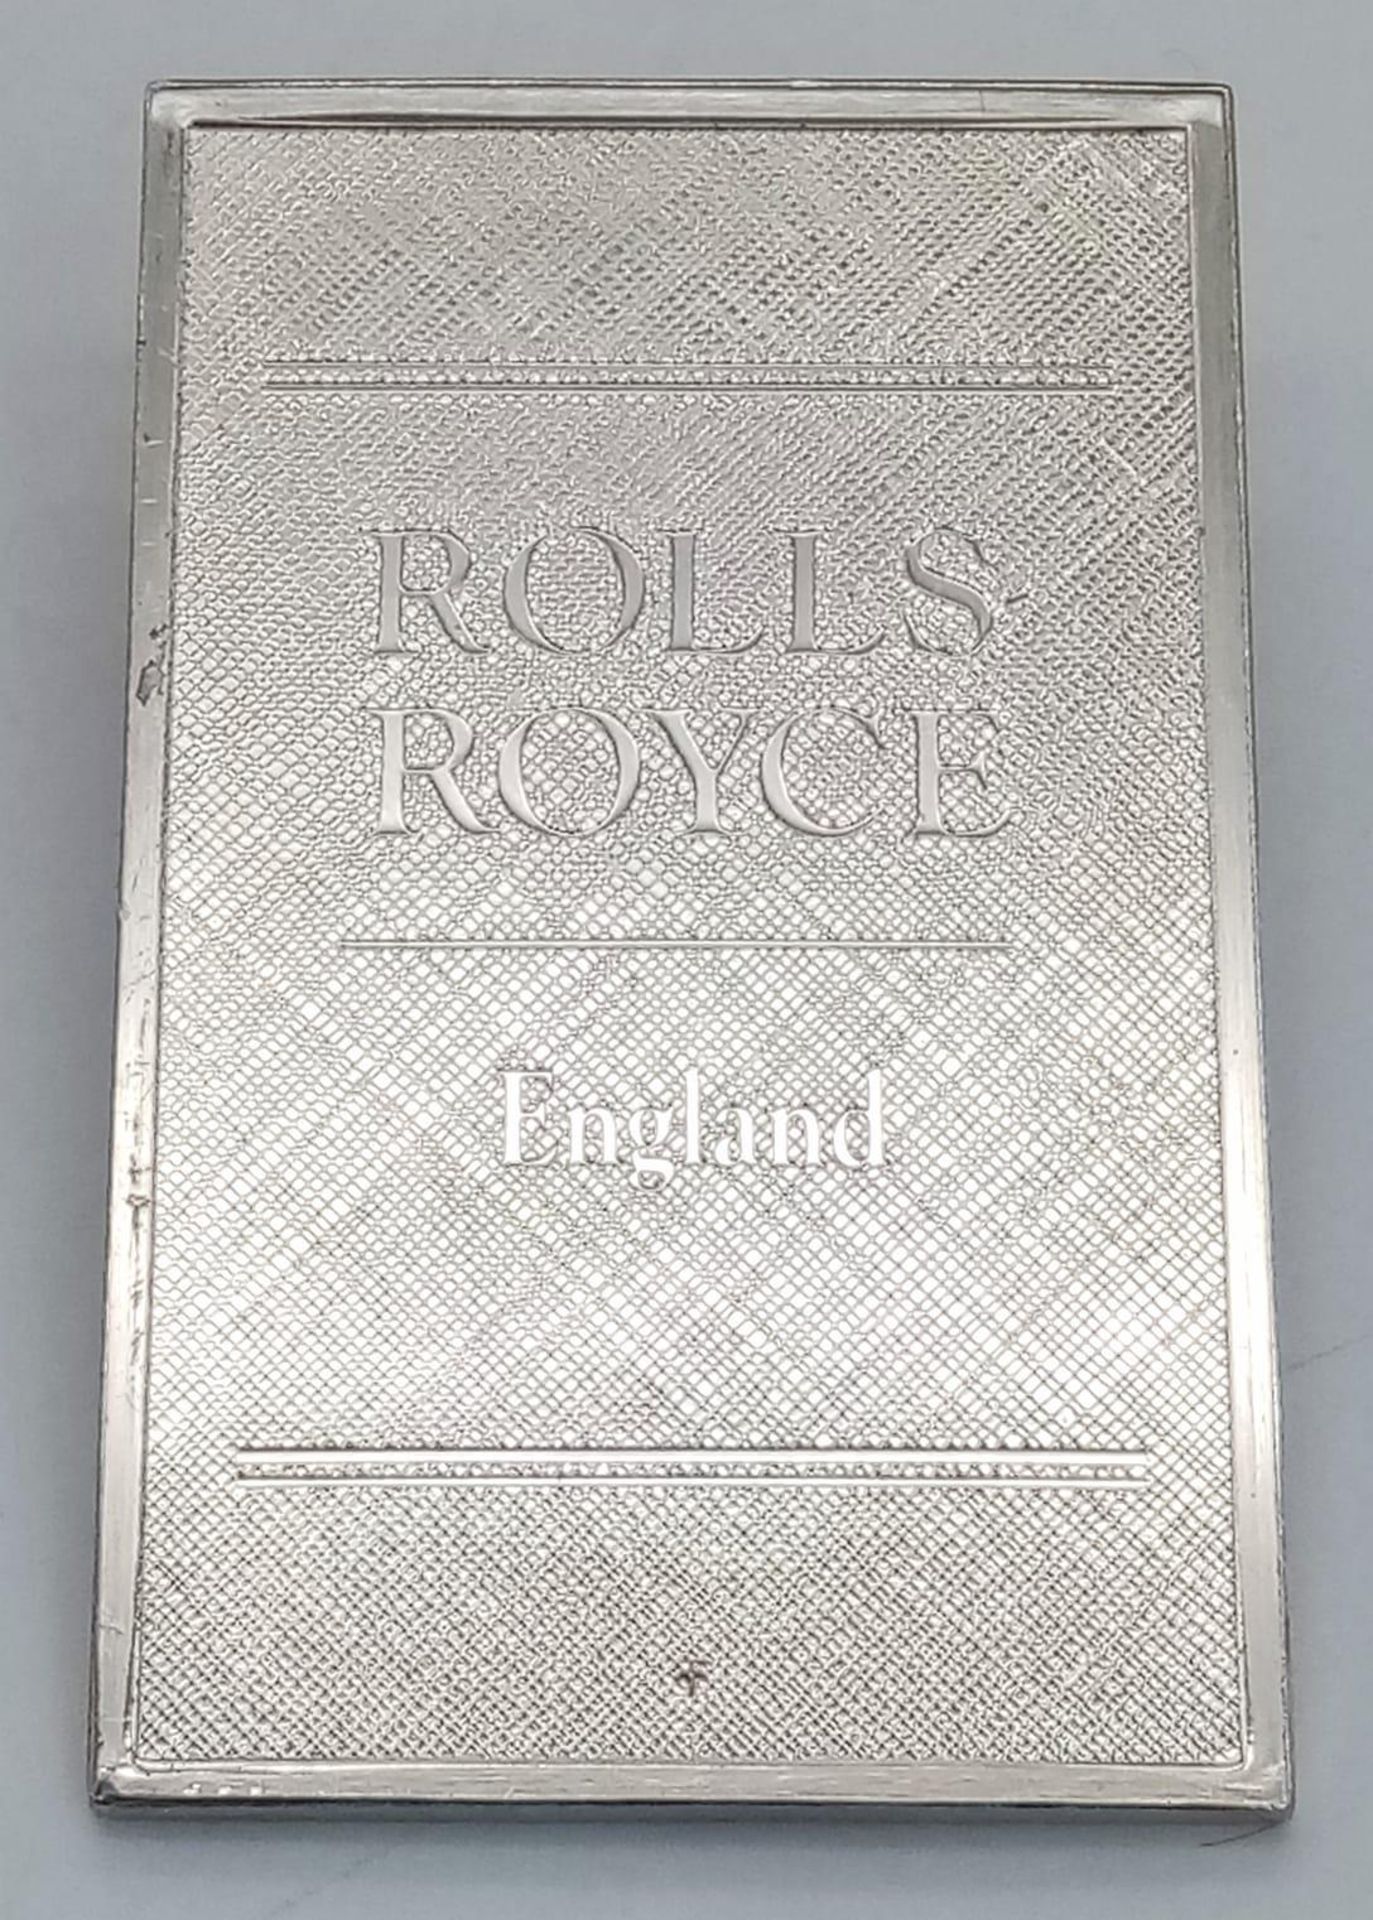 A STERLING SILVER ROLLS ROYCE PLAQUE ENGLISH CAR MANUFACTURER 23G , 43mm x 28mm. ref: 8131 - Image 2 of 2